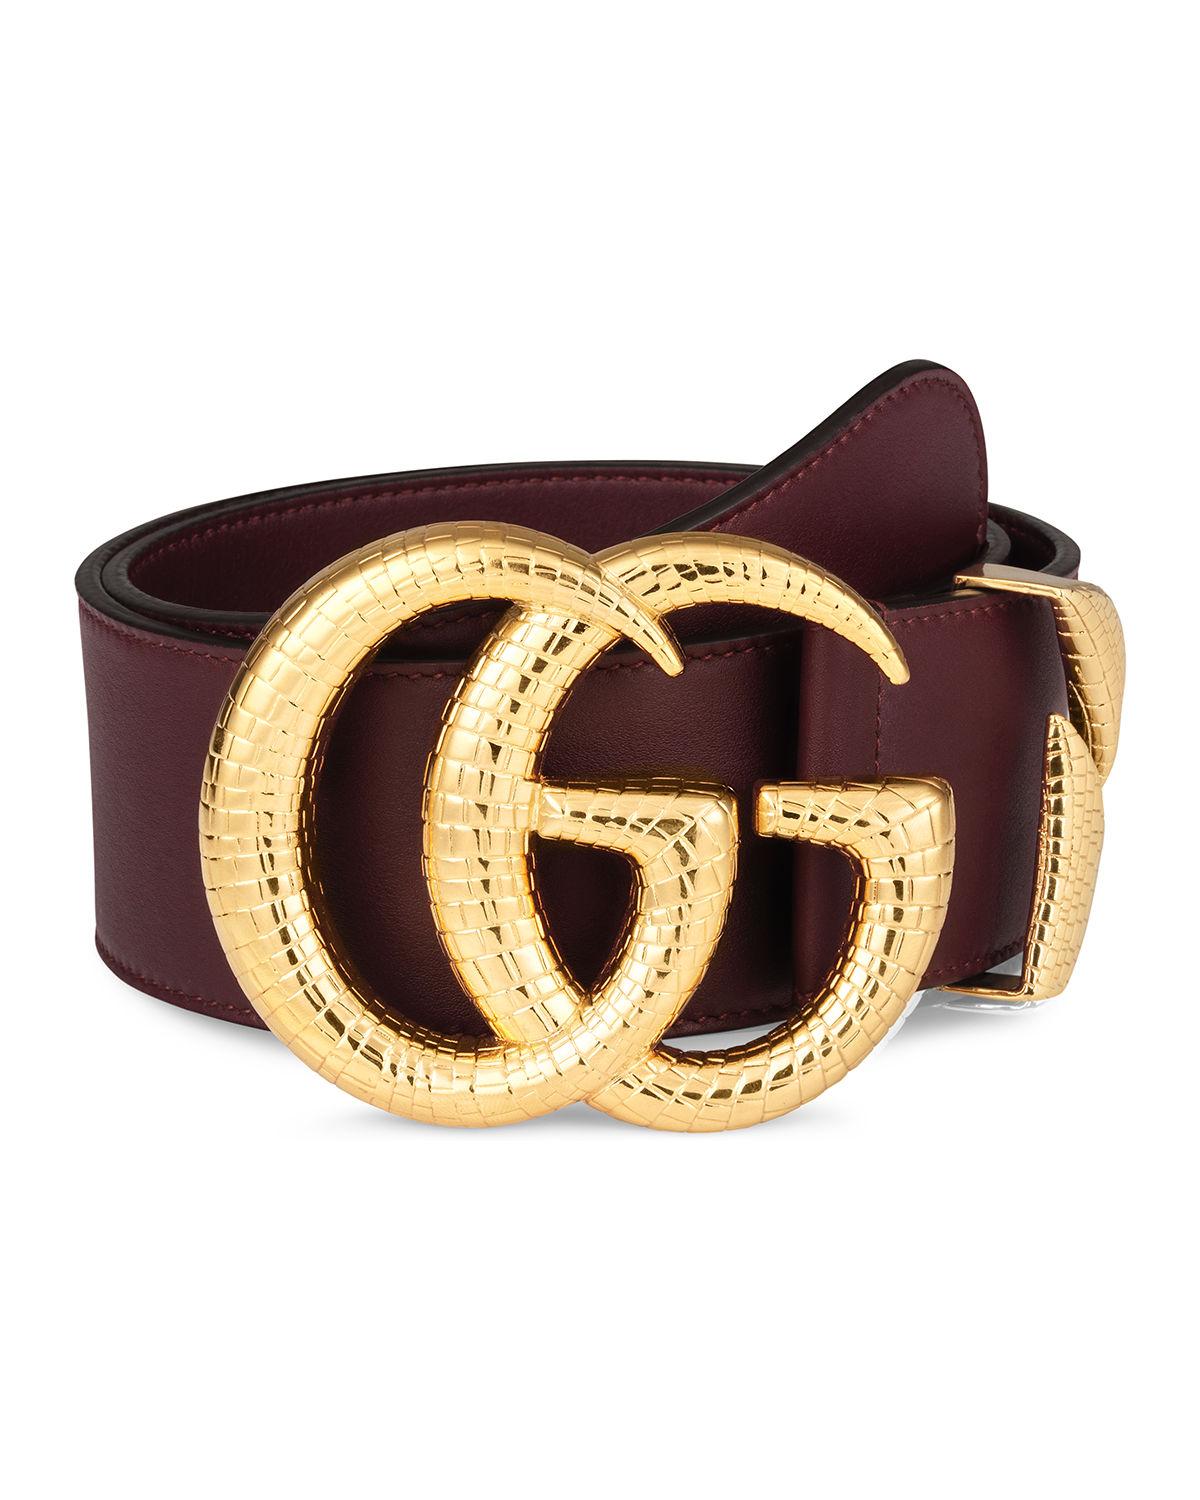 Gucci Smooth Leather Belt W/ Double G Buckle - Lyst